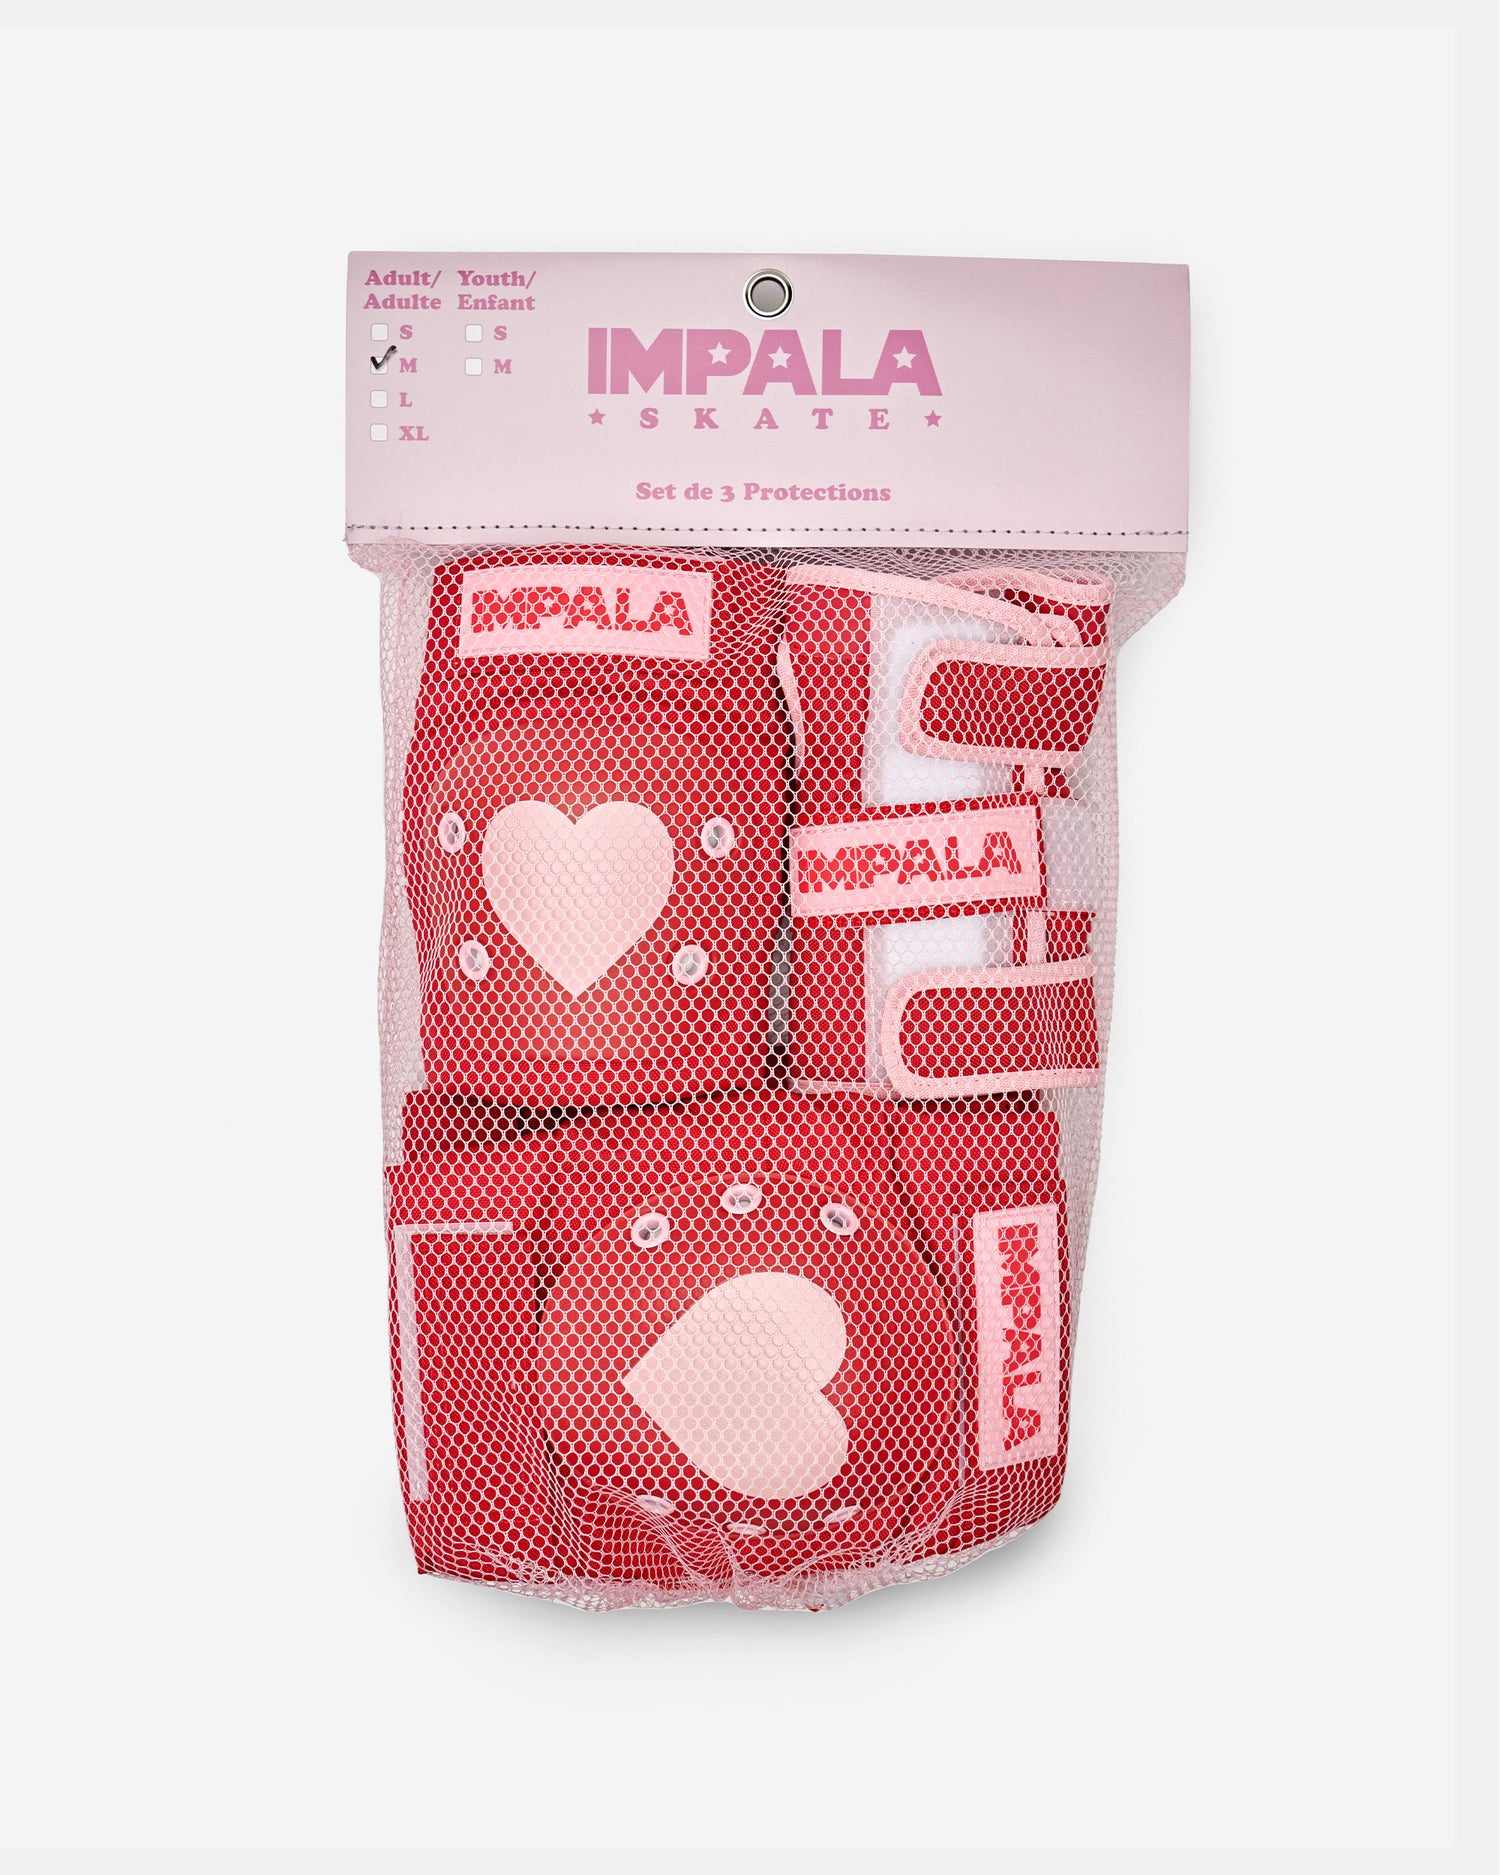 Packaging of Impala Protective Set - Red Hearts